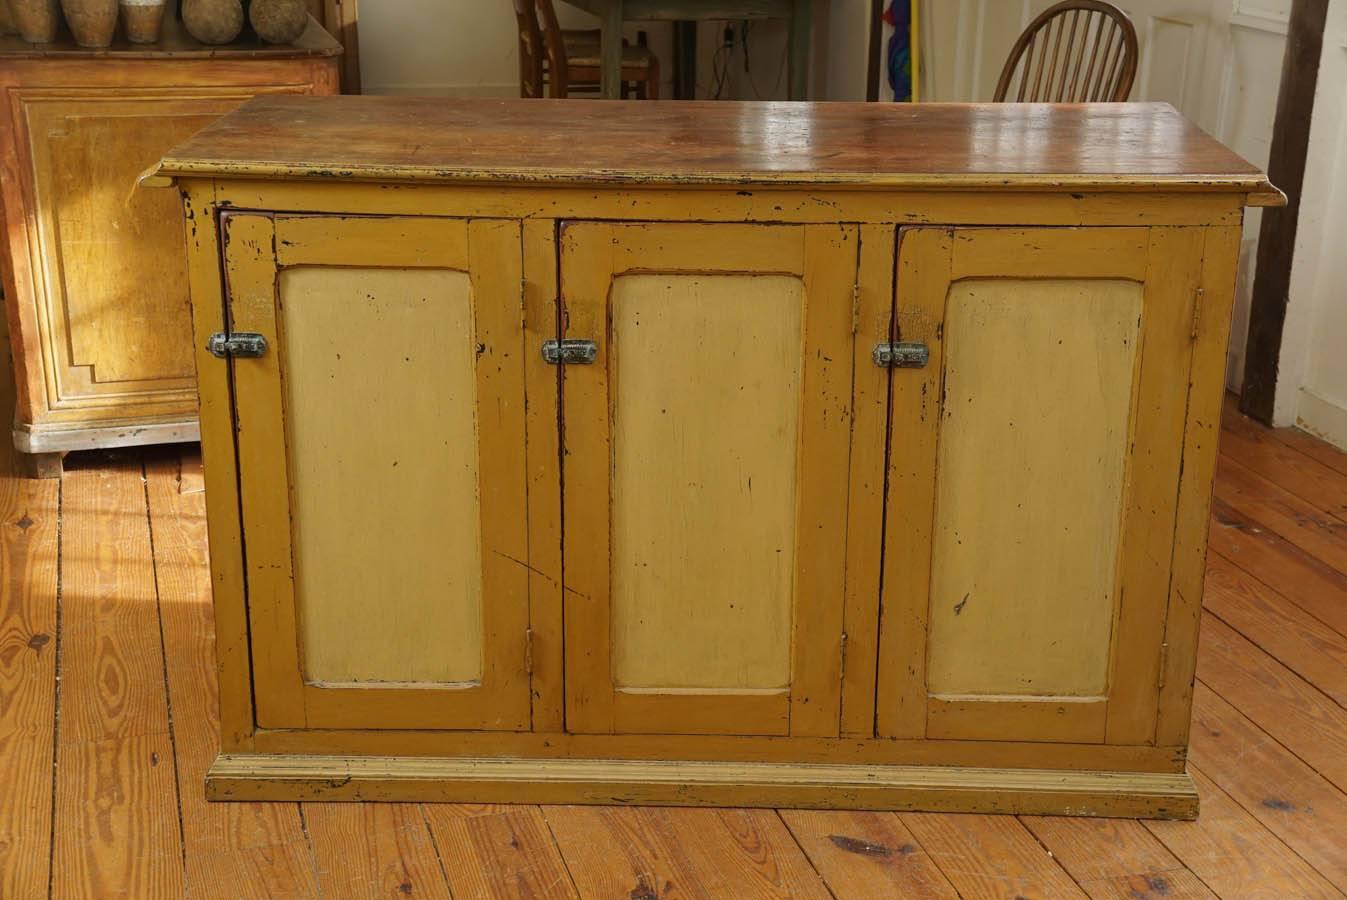 This is a beauty! One of many store counters on display at painted porch. This Canadian piece is two toned in cream and mustard yellow. One side has wrought iron latches where the owner stored his food for sale in this general store. The other side